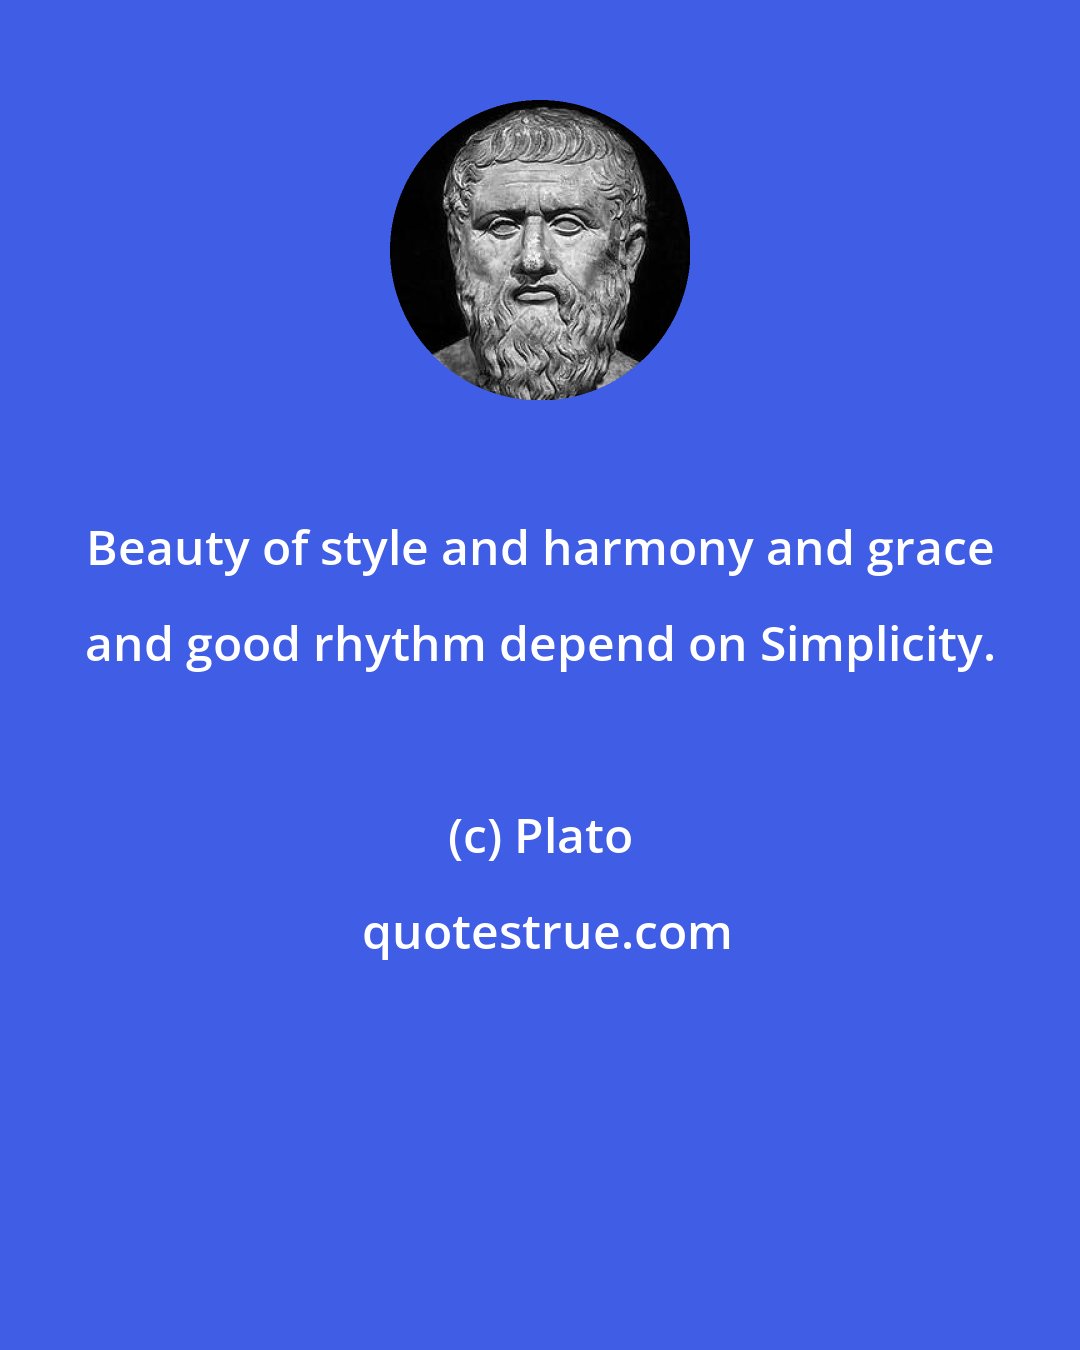 Plato: Beauty of style and harmony and grace and good rhythm depend on Simplicity.